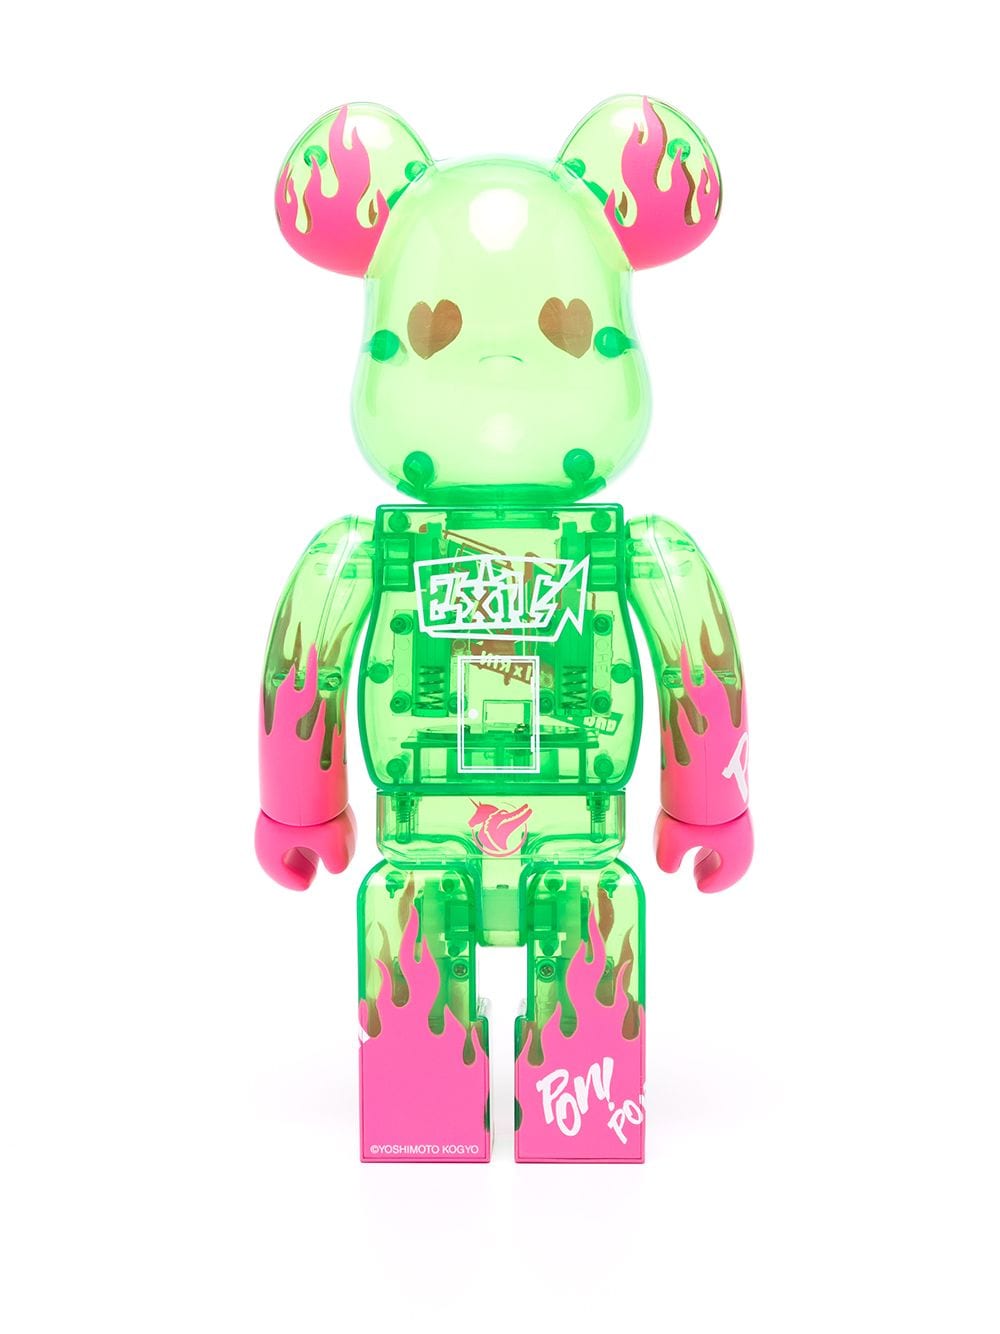 MEDICOM TOY Be@rBrick Exit 400% Collectible Figure - Farfetch